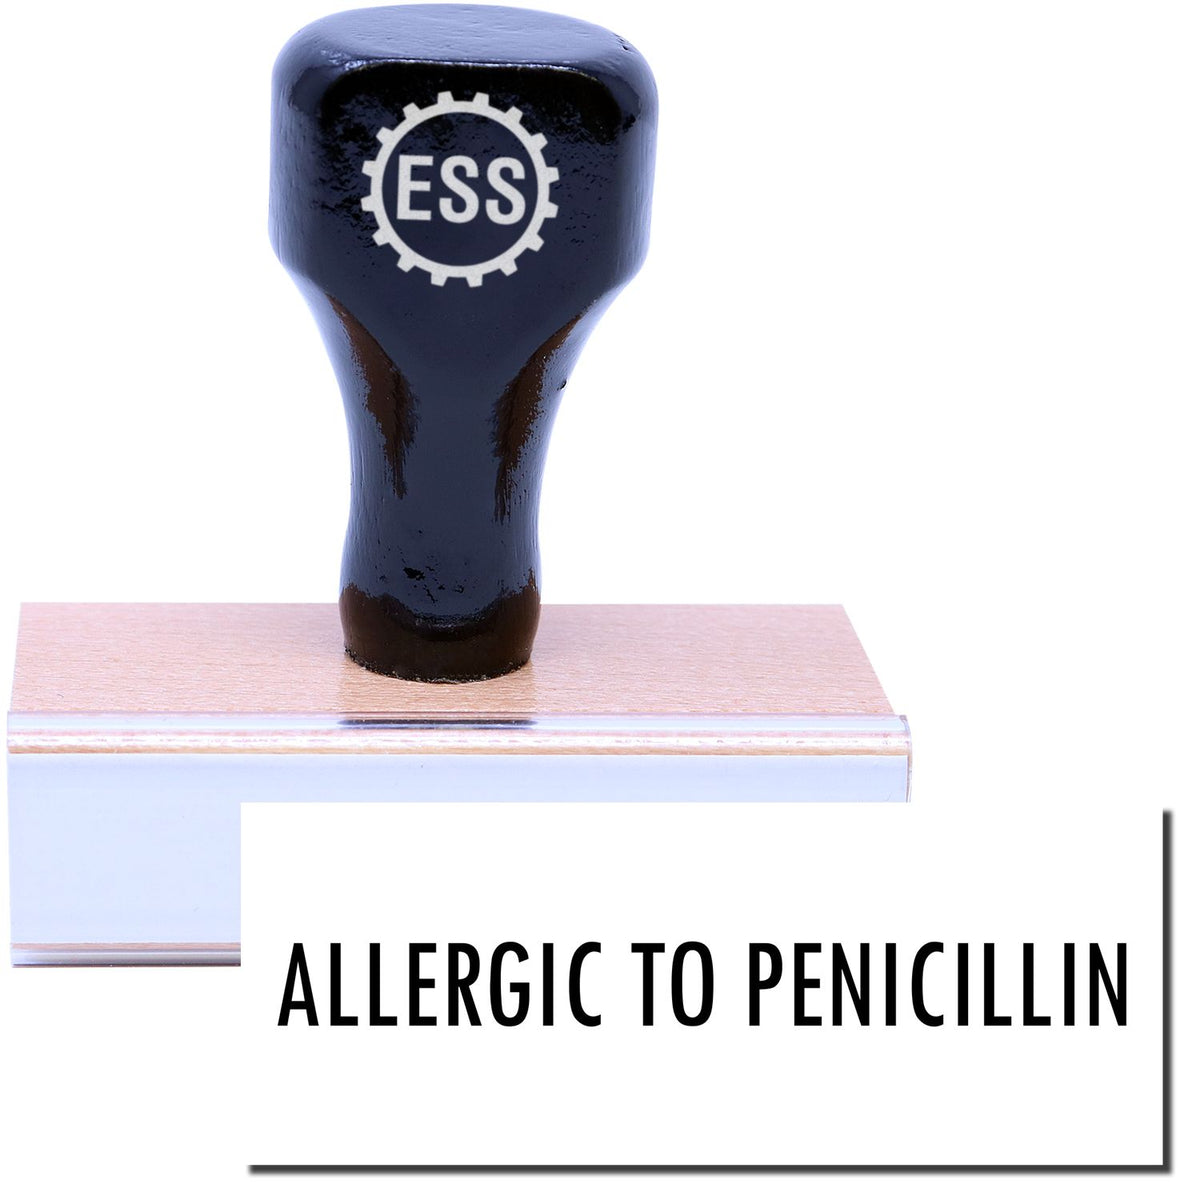 A stock office medical rubber stamp with a stamped image showing how the text &quot;ALLERGIC TO PENICILLIN&quot; is displayed after stamping.